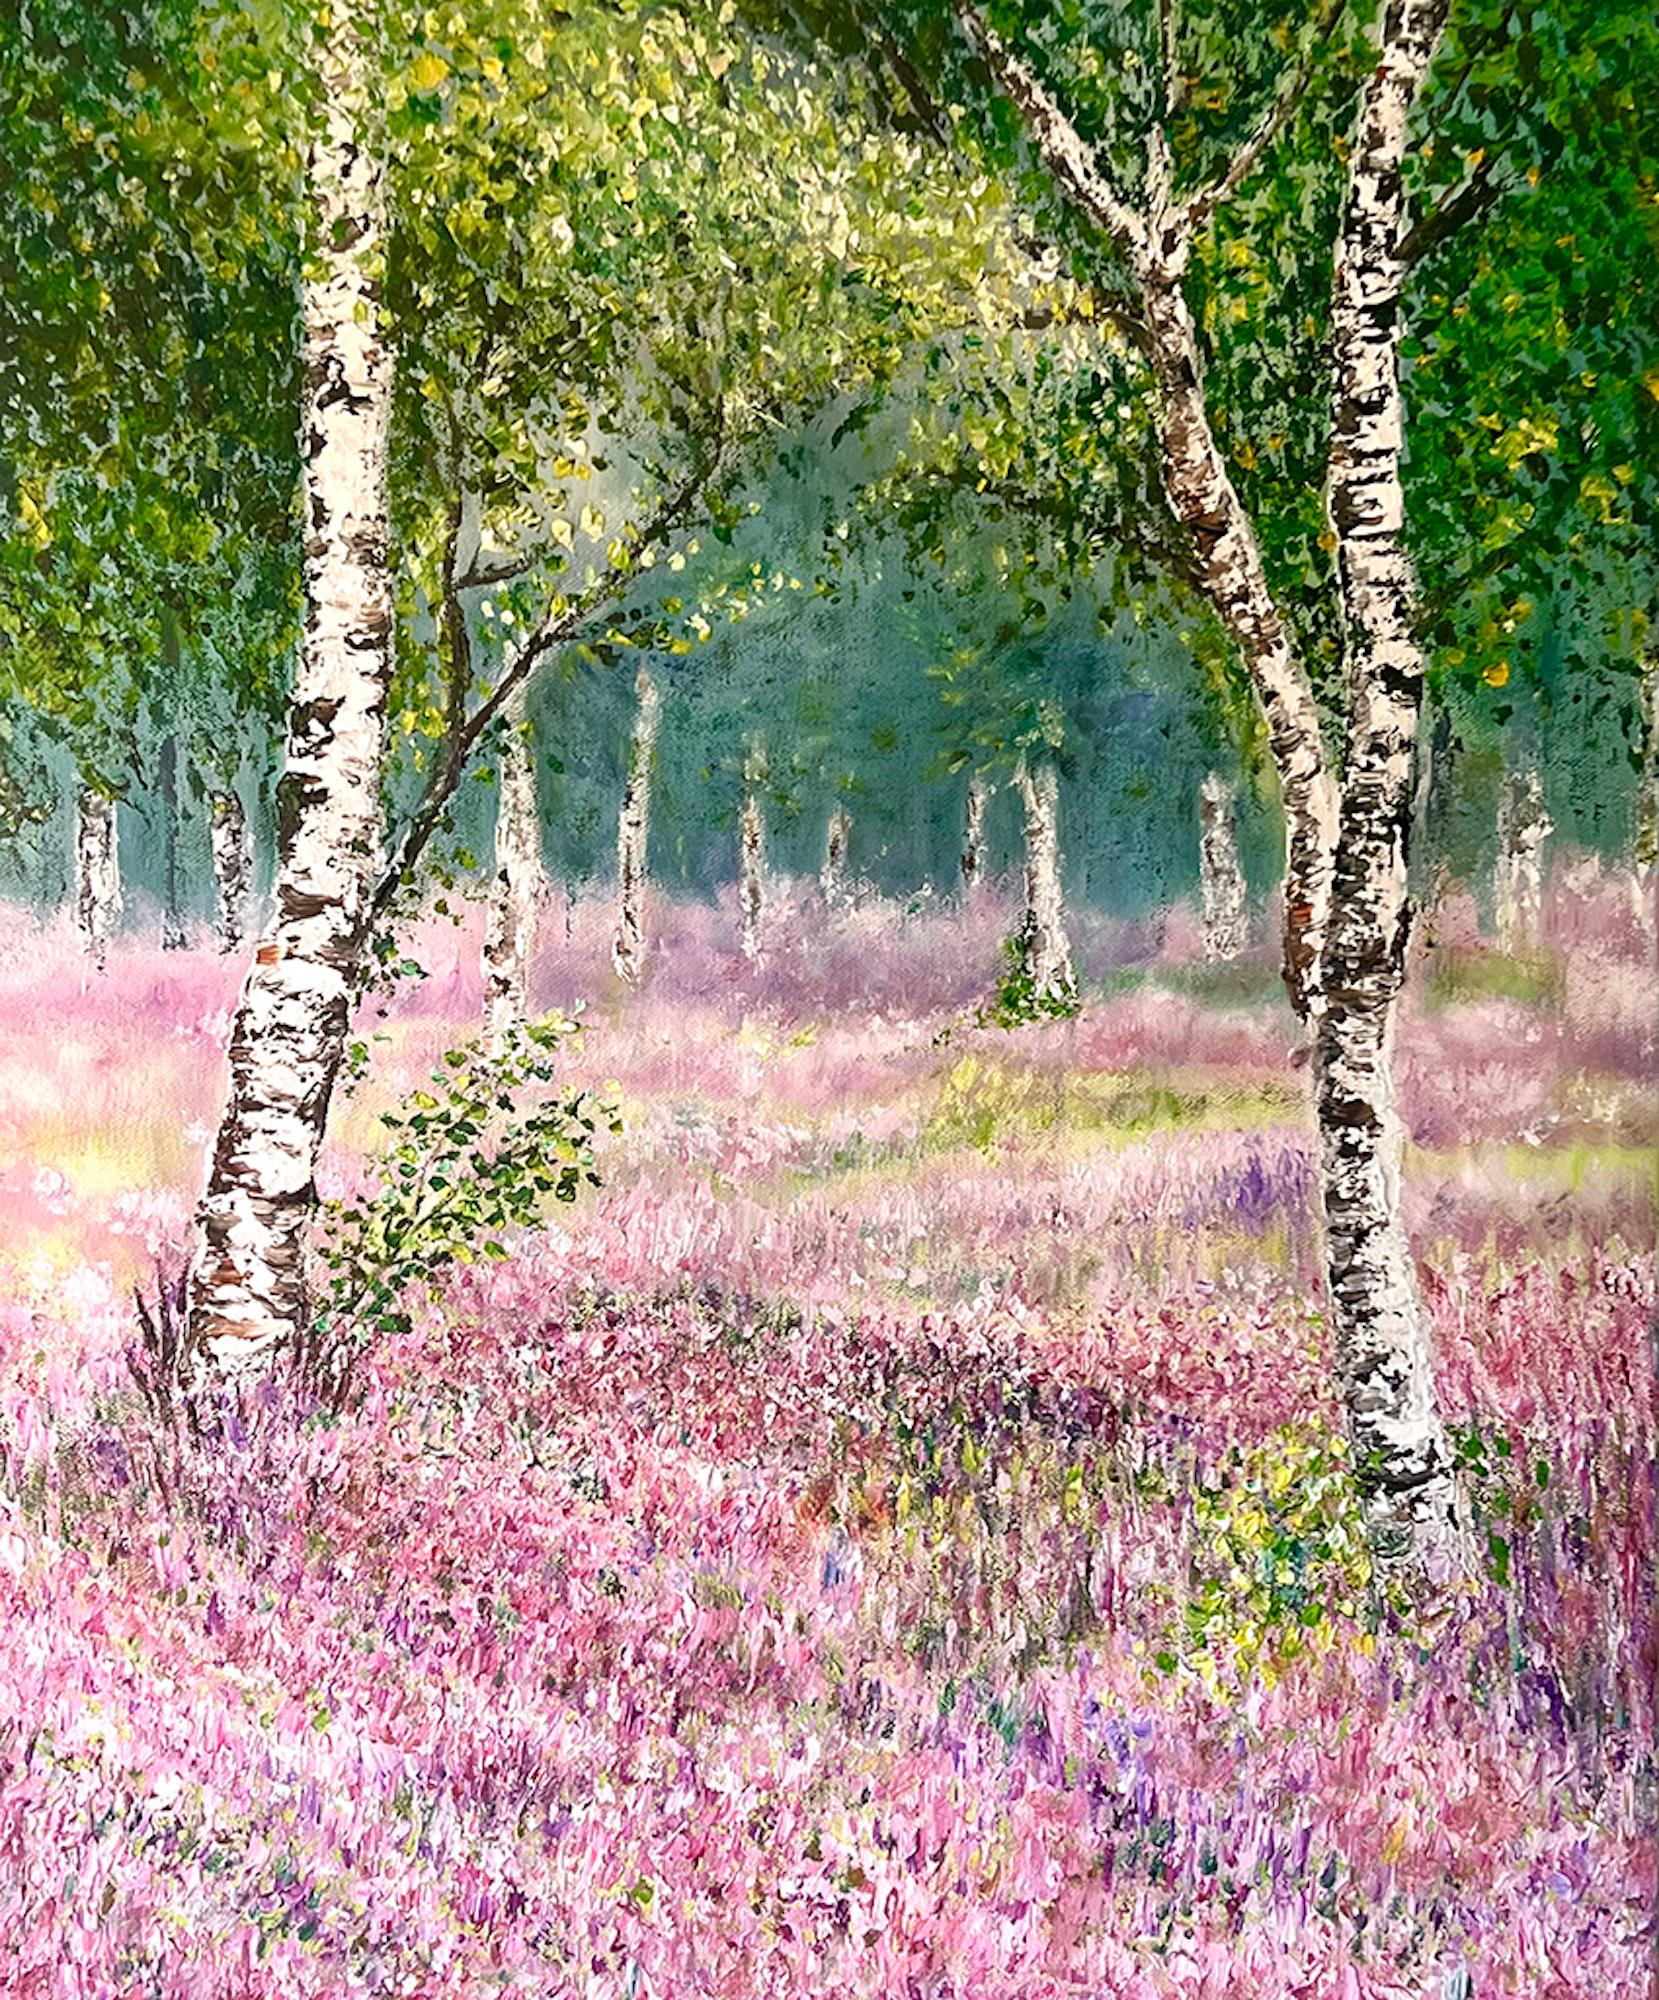 This piece was inspired by a feeling of tranquillity walking through a bed of flowering heather. I loved the combination of birch trees amongst the beautiful pinks and lilacs. The soft lighting and sense of depth gives the painting a dreamy feel and